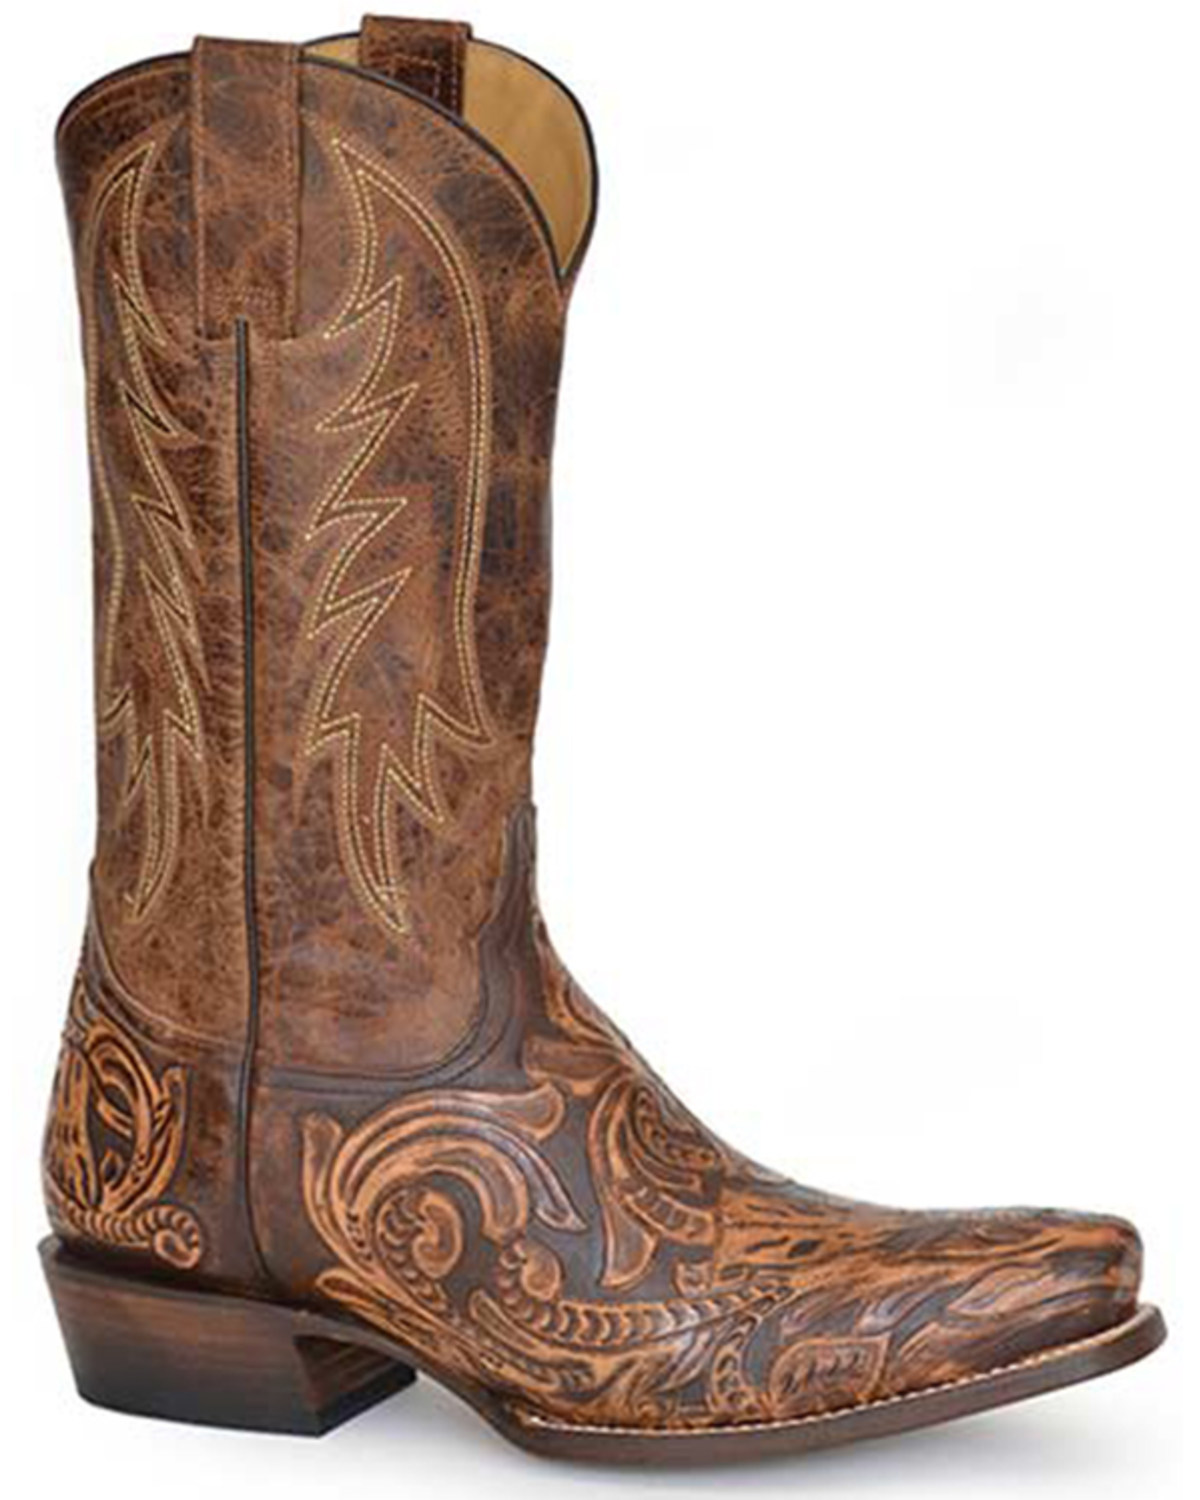 Stetson Men's Handtooled Legend Western Boots - Square Toe